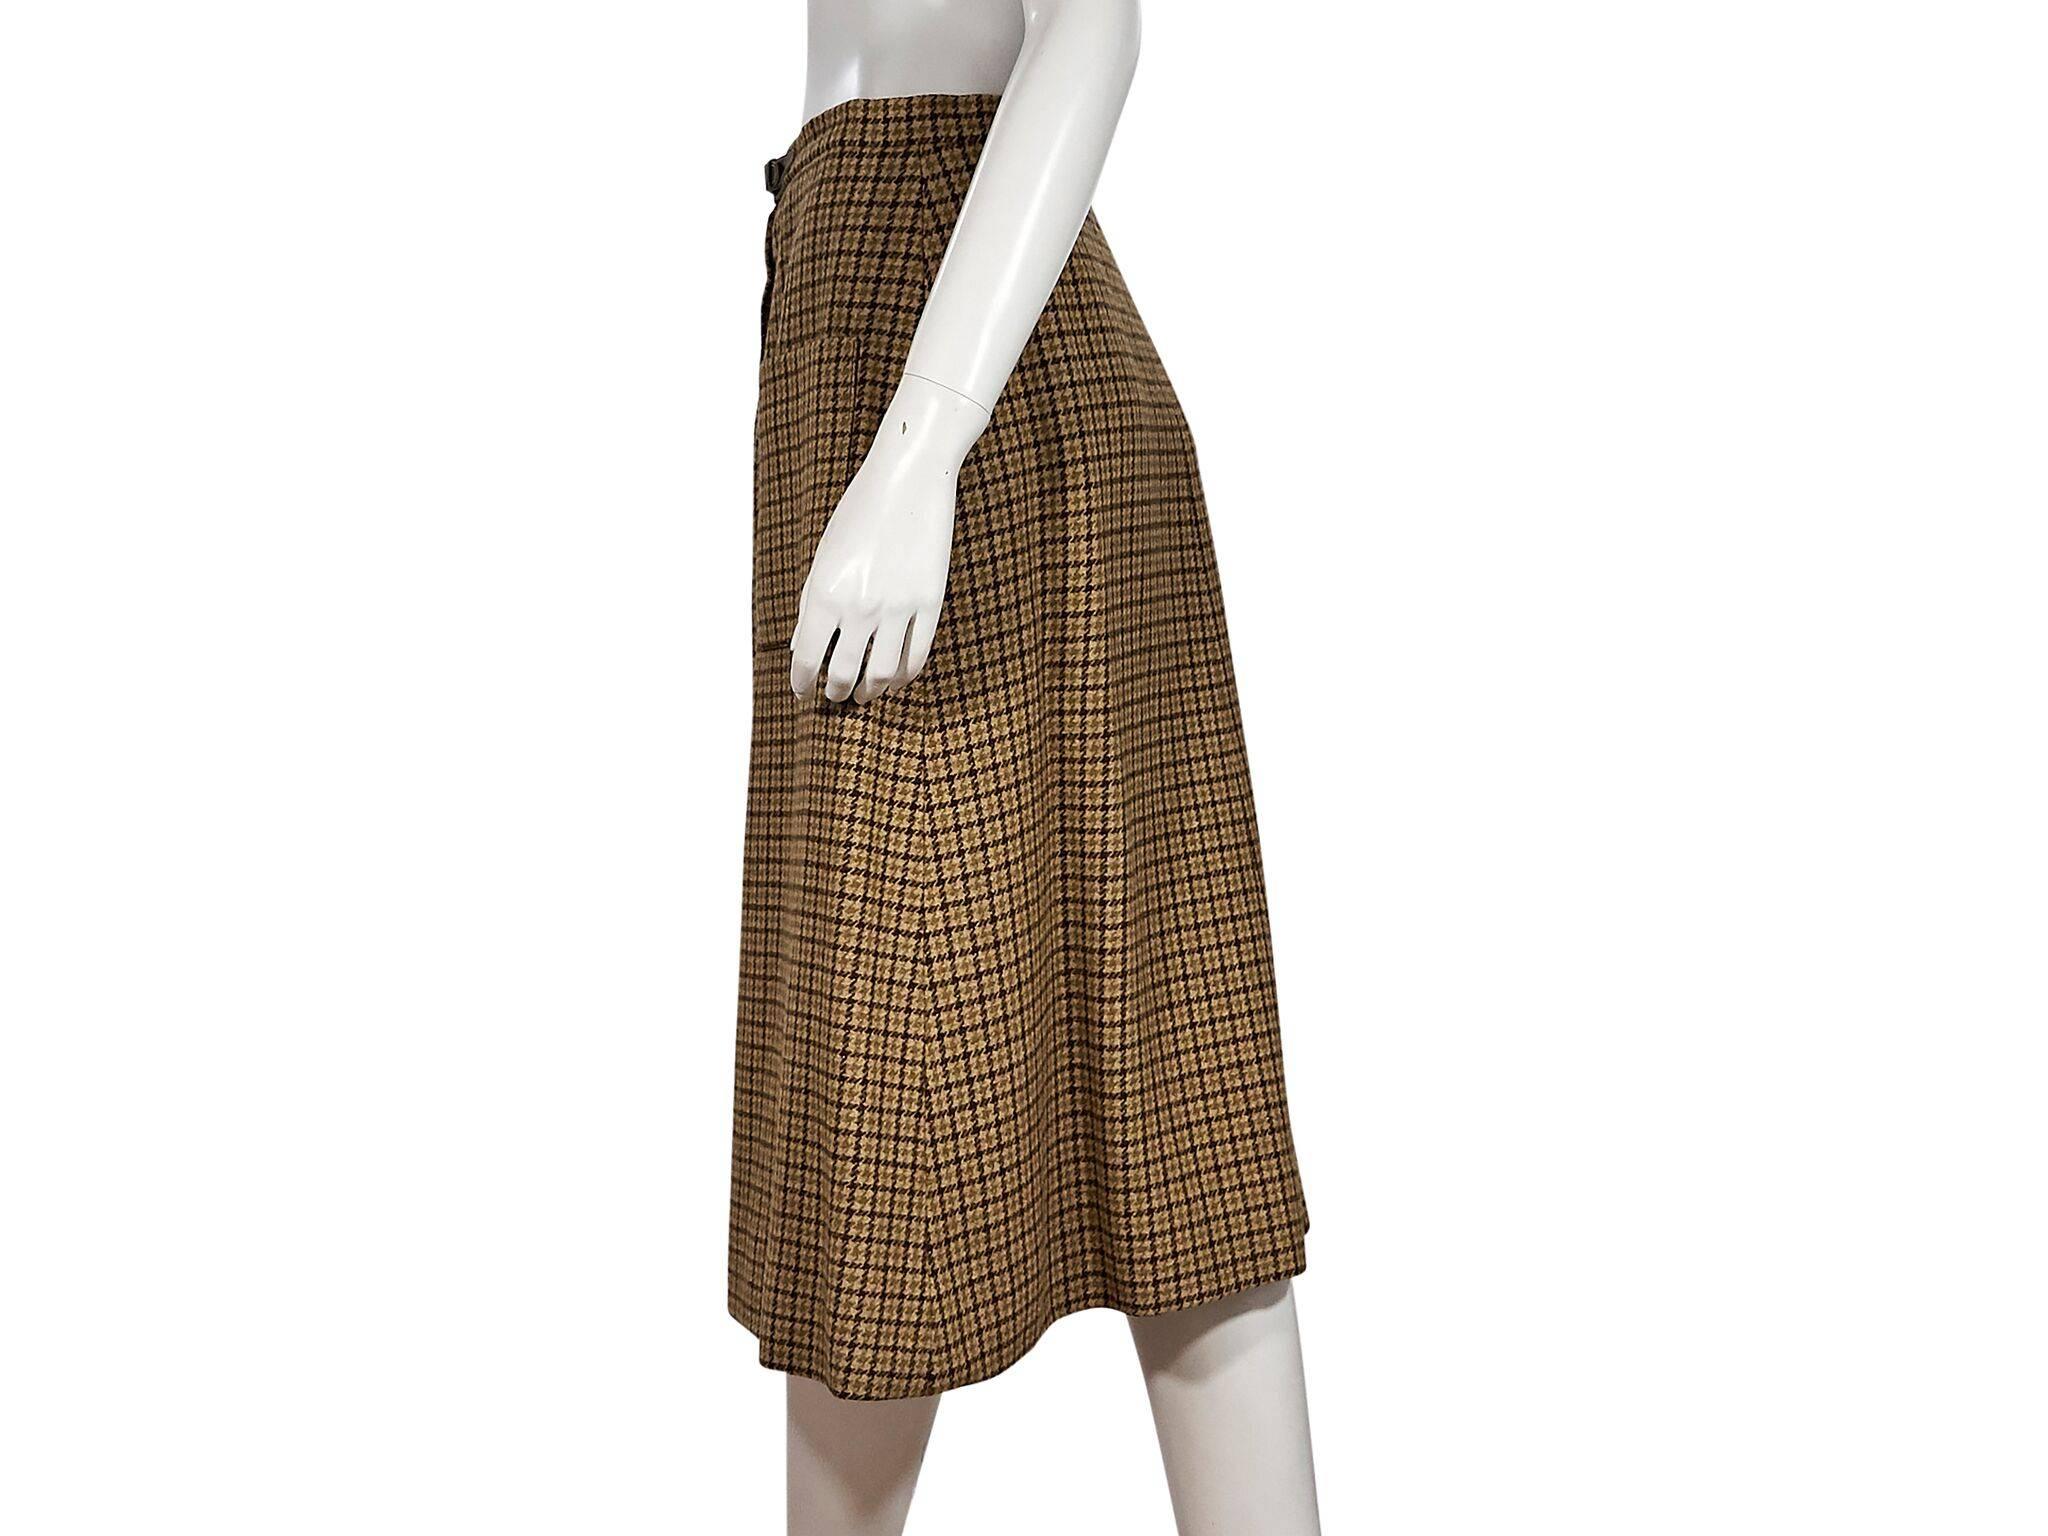 Product details:  Vintage tan wool A-line skirt by Hermes.  Leather belted accent.  Zip-front closure.  Front patch pockets.  Label size FR 42.  30